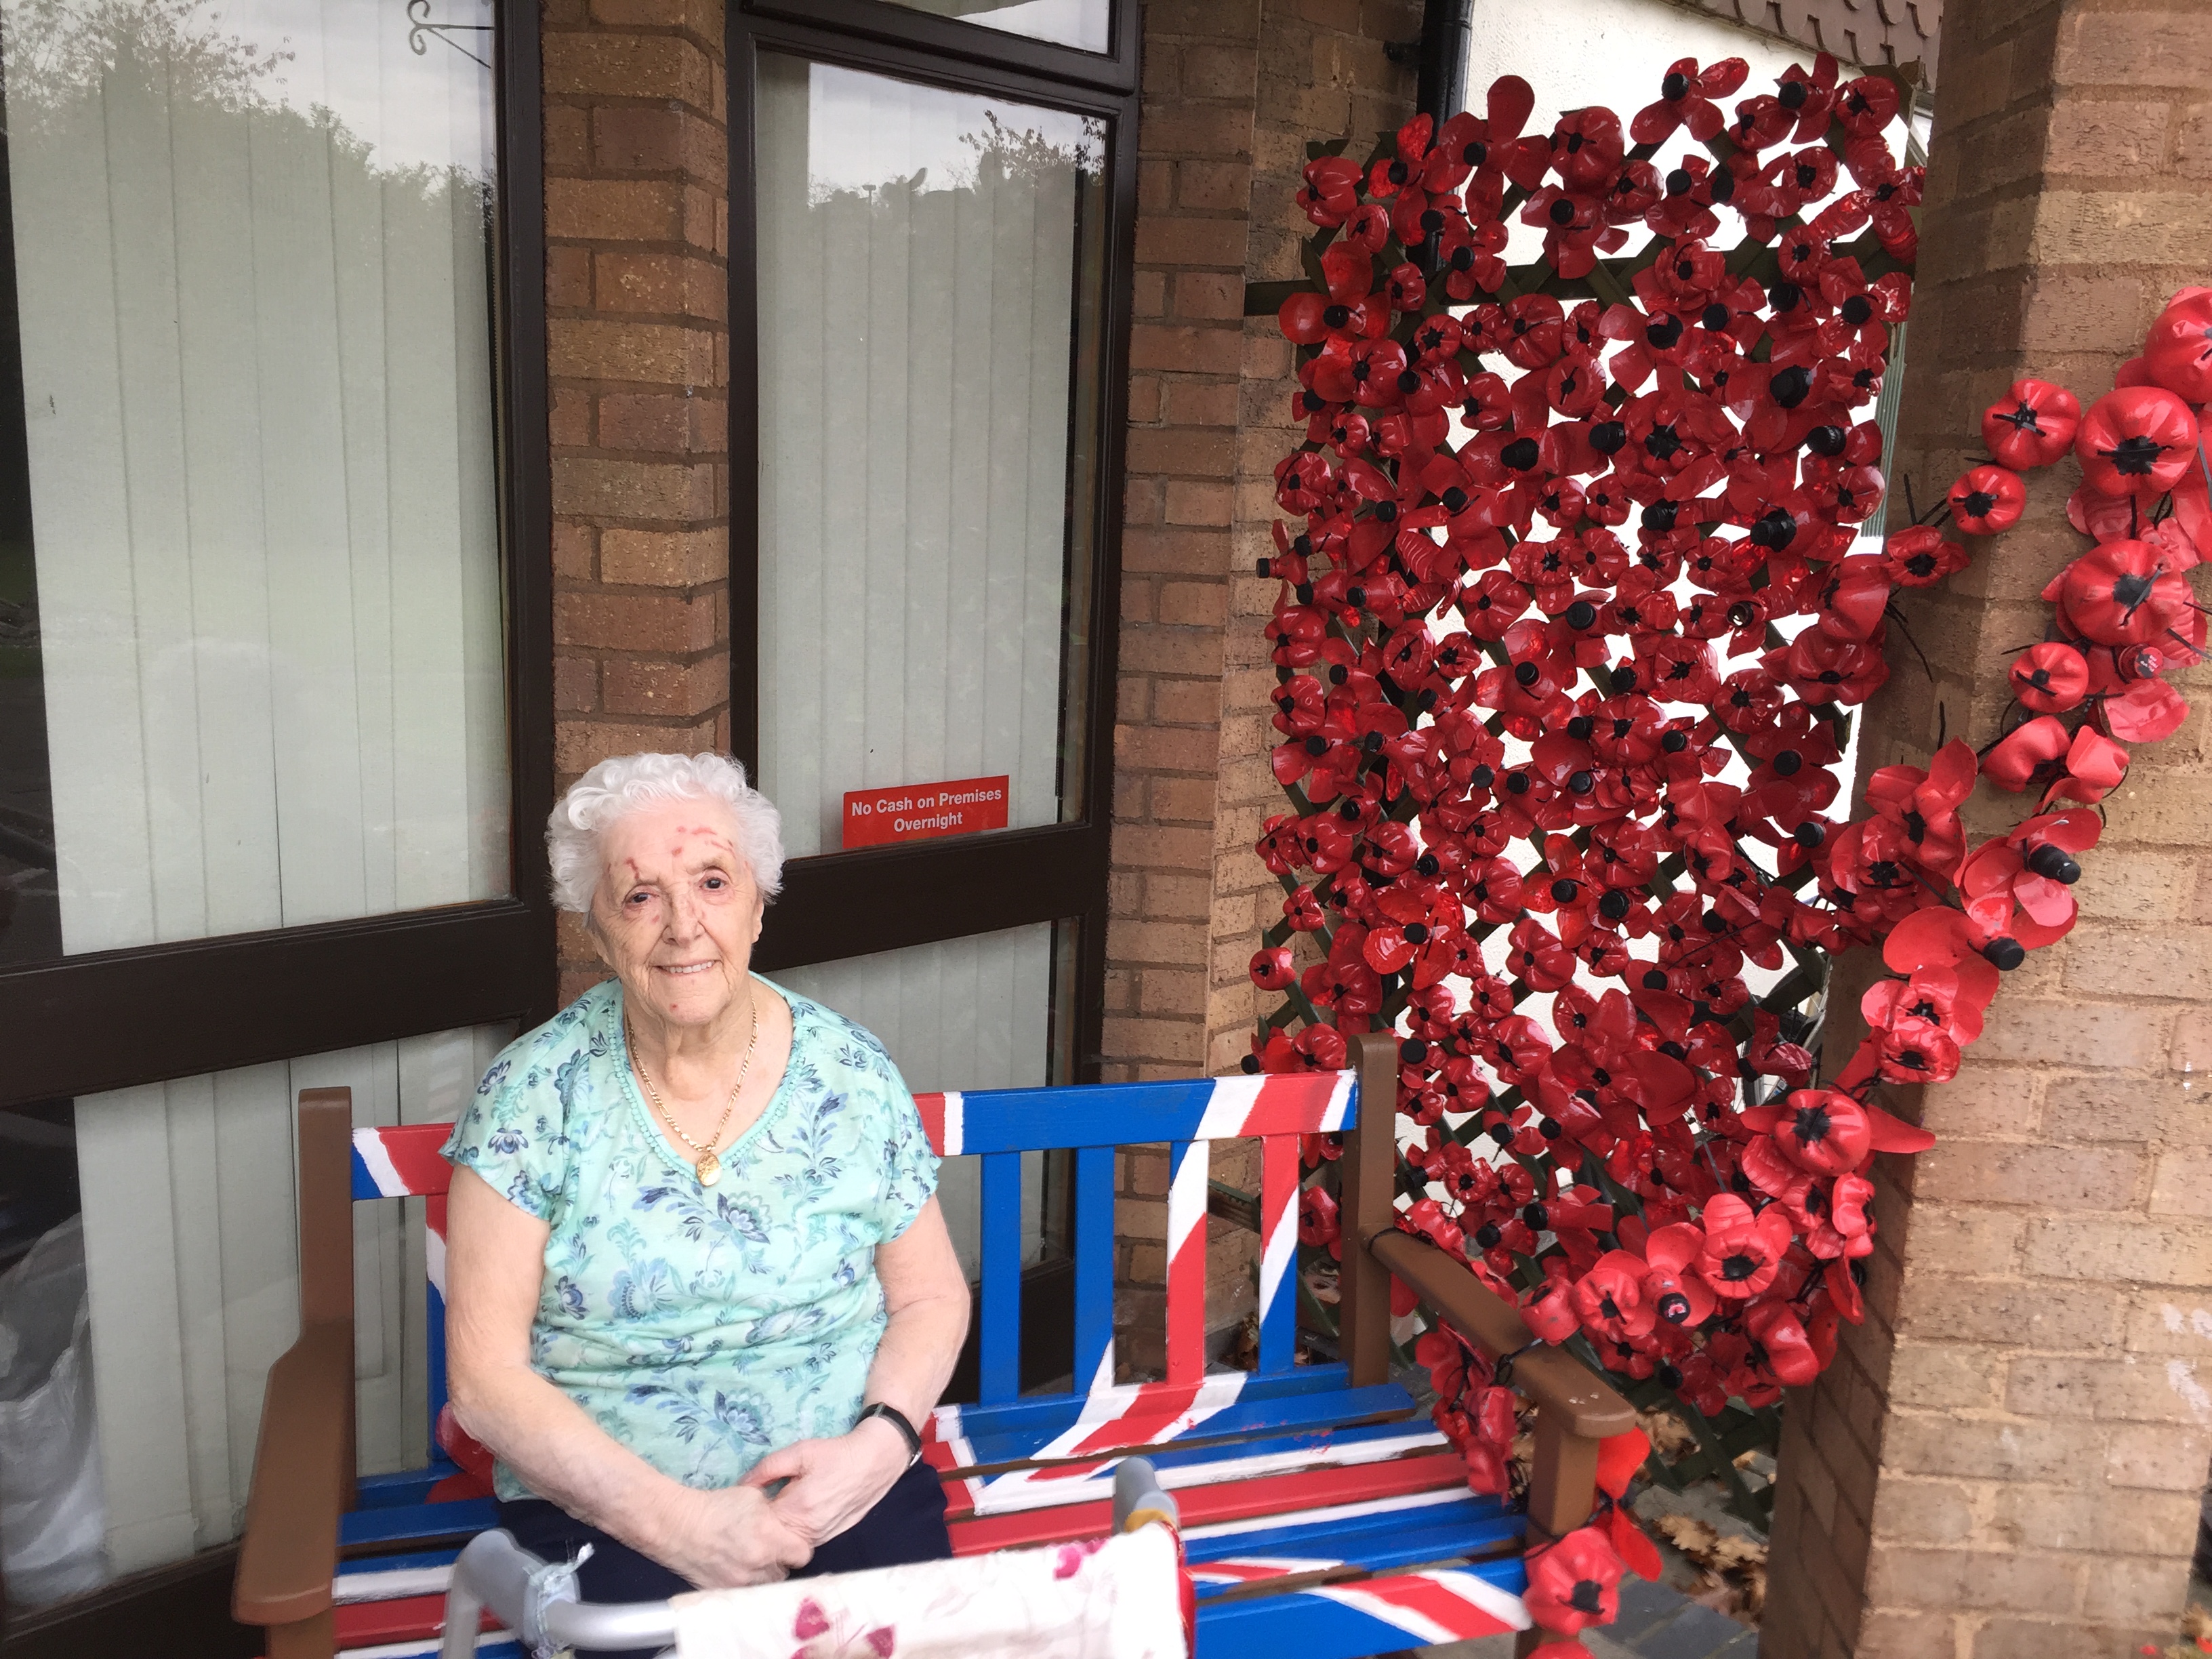 A resident of Fosse House sat with the poppy memorial